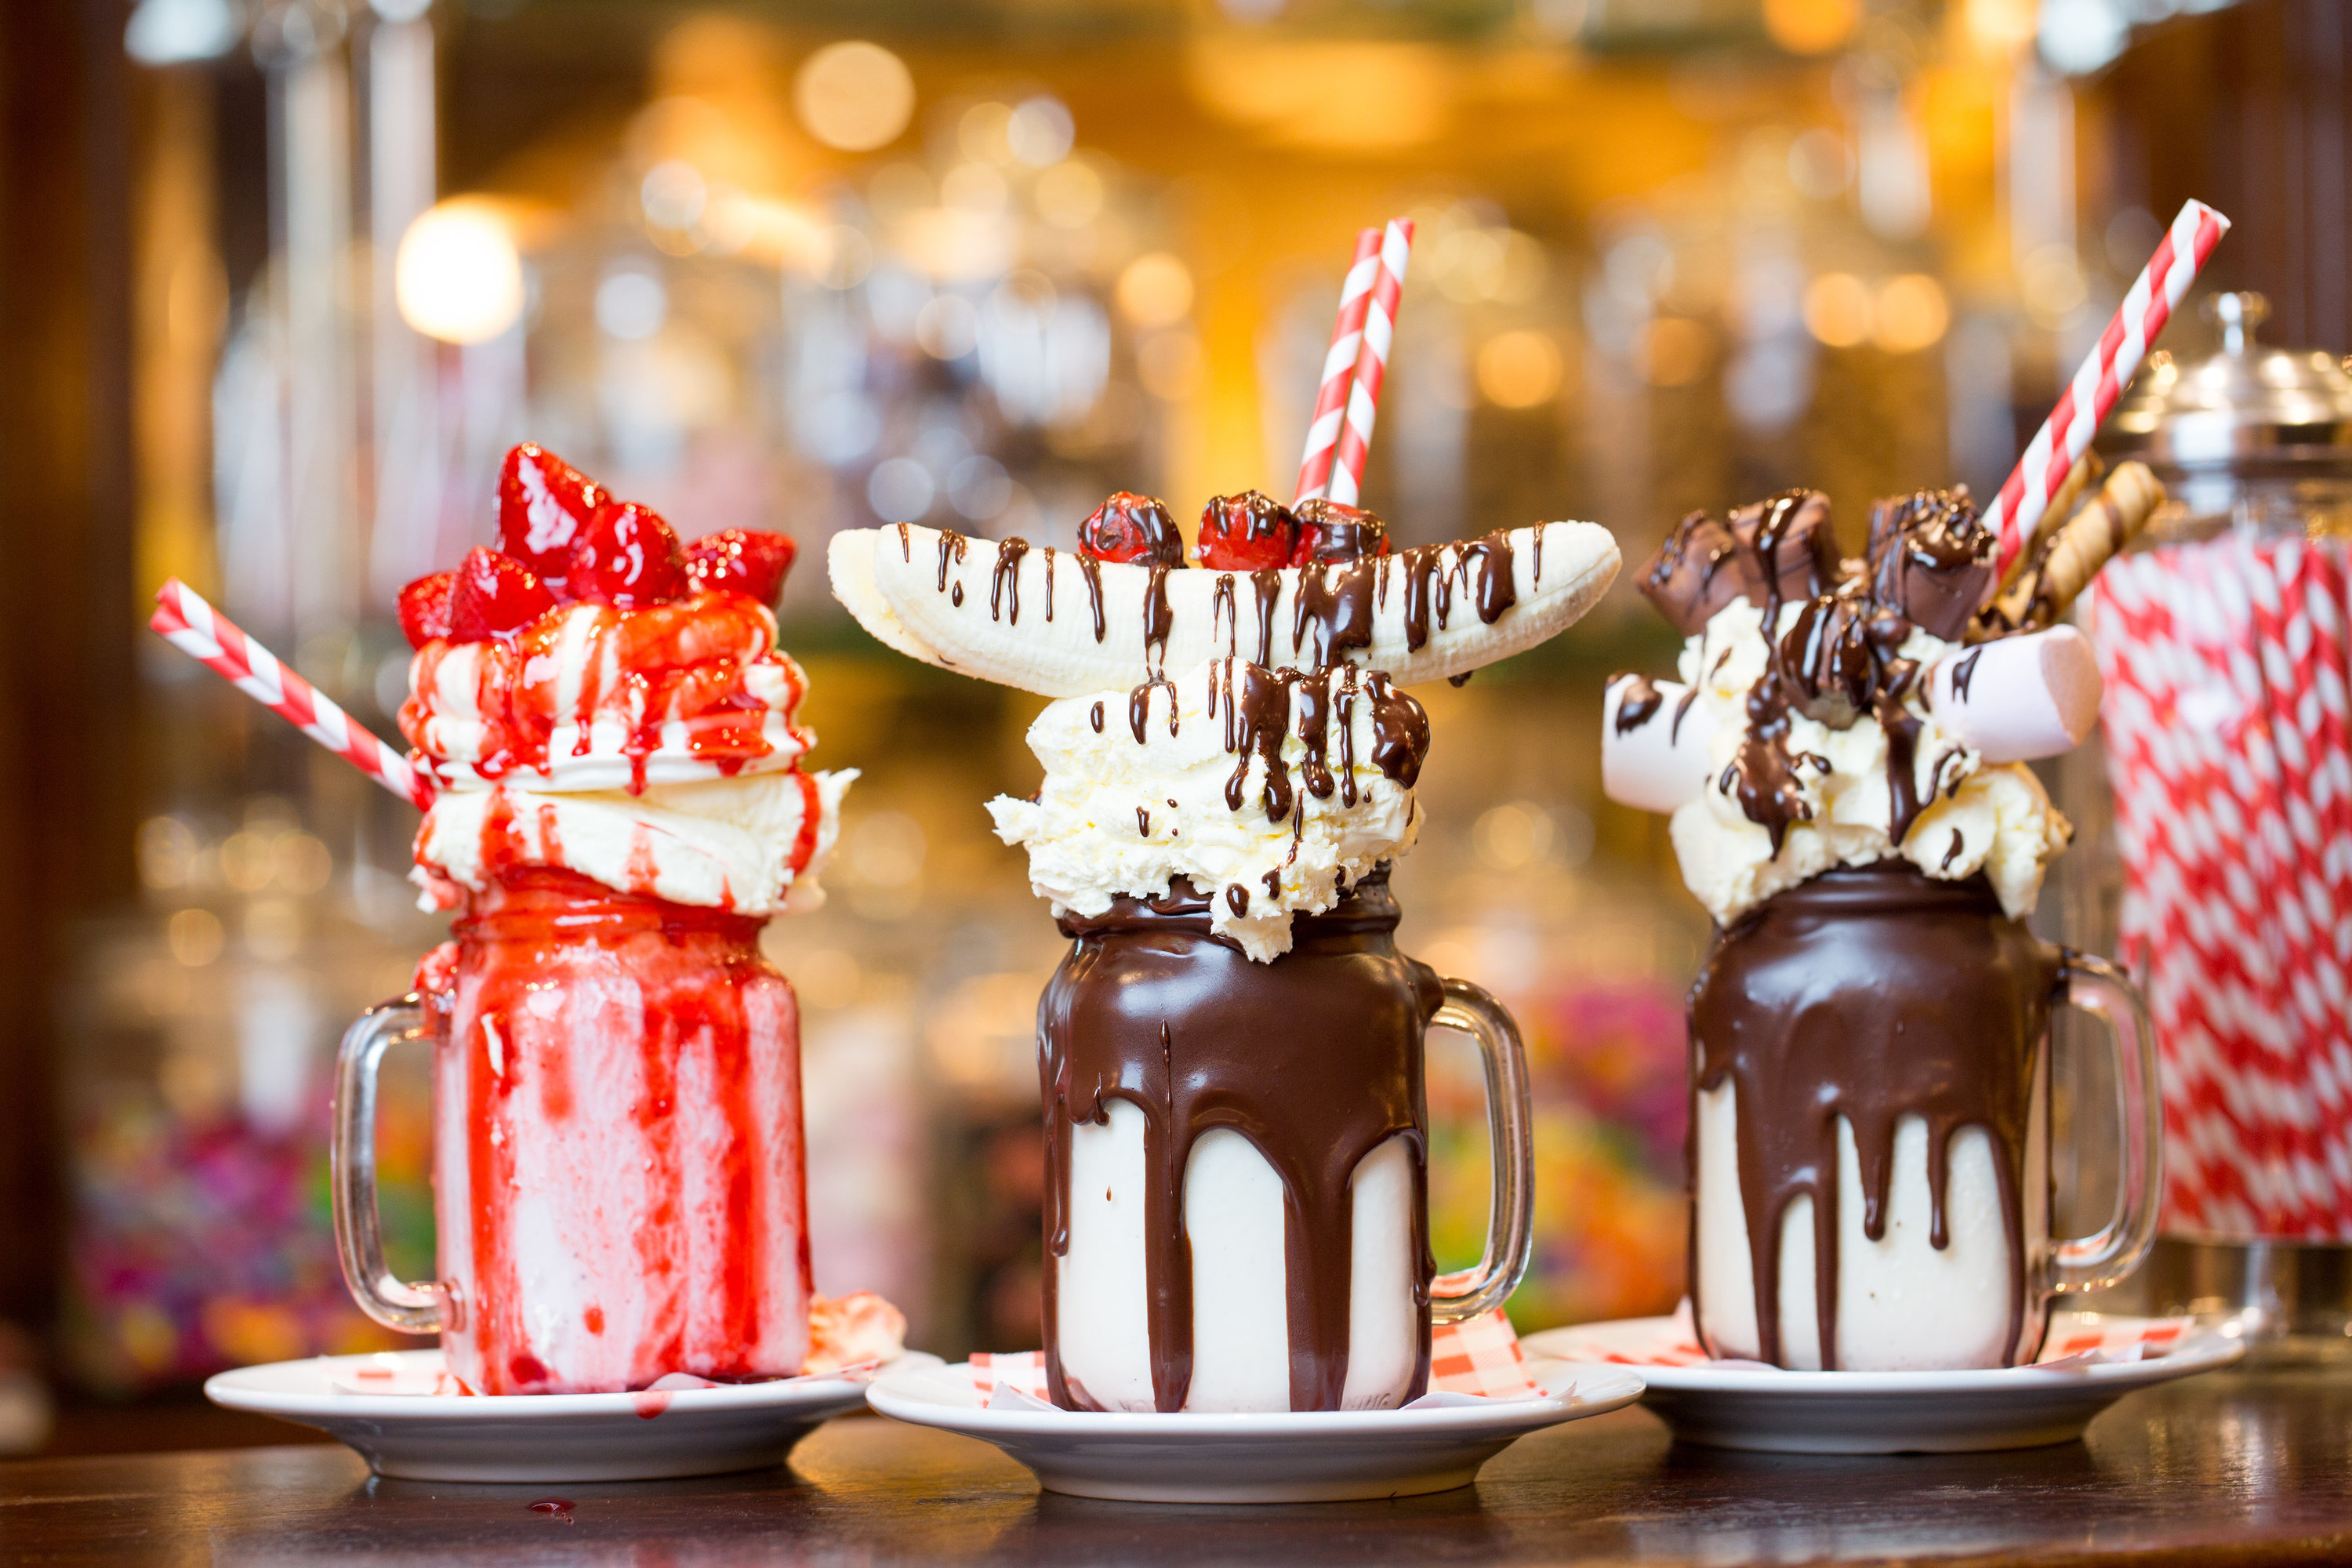 Freakshakes in London: where to try the weird food trend